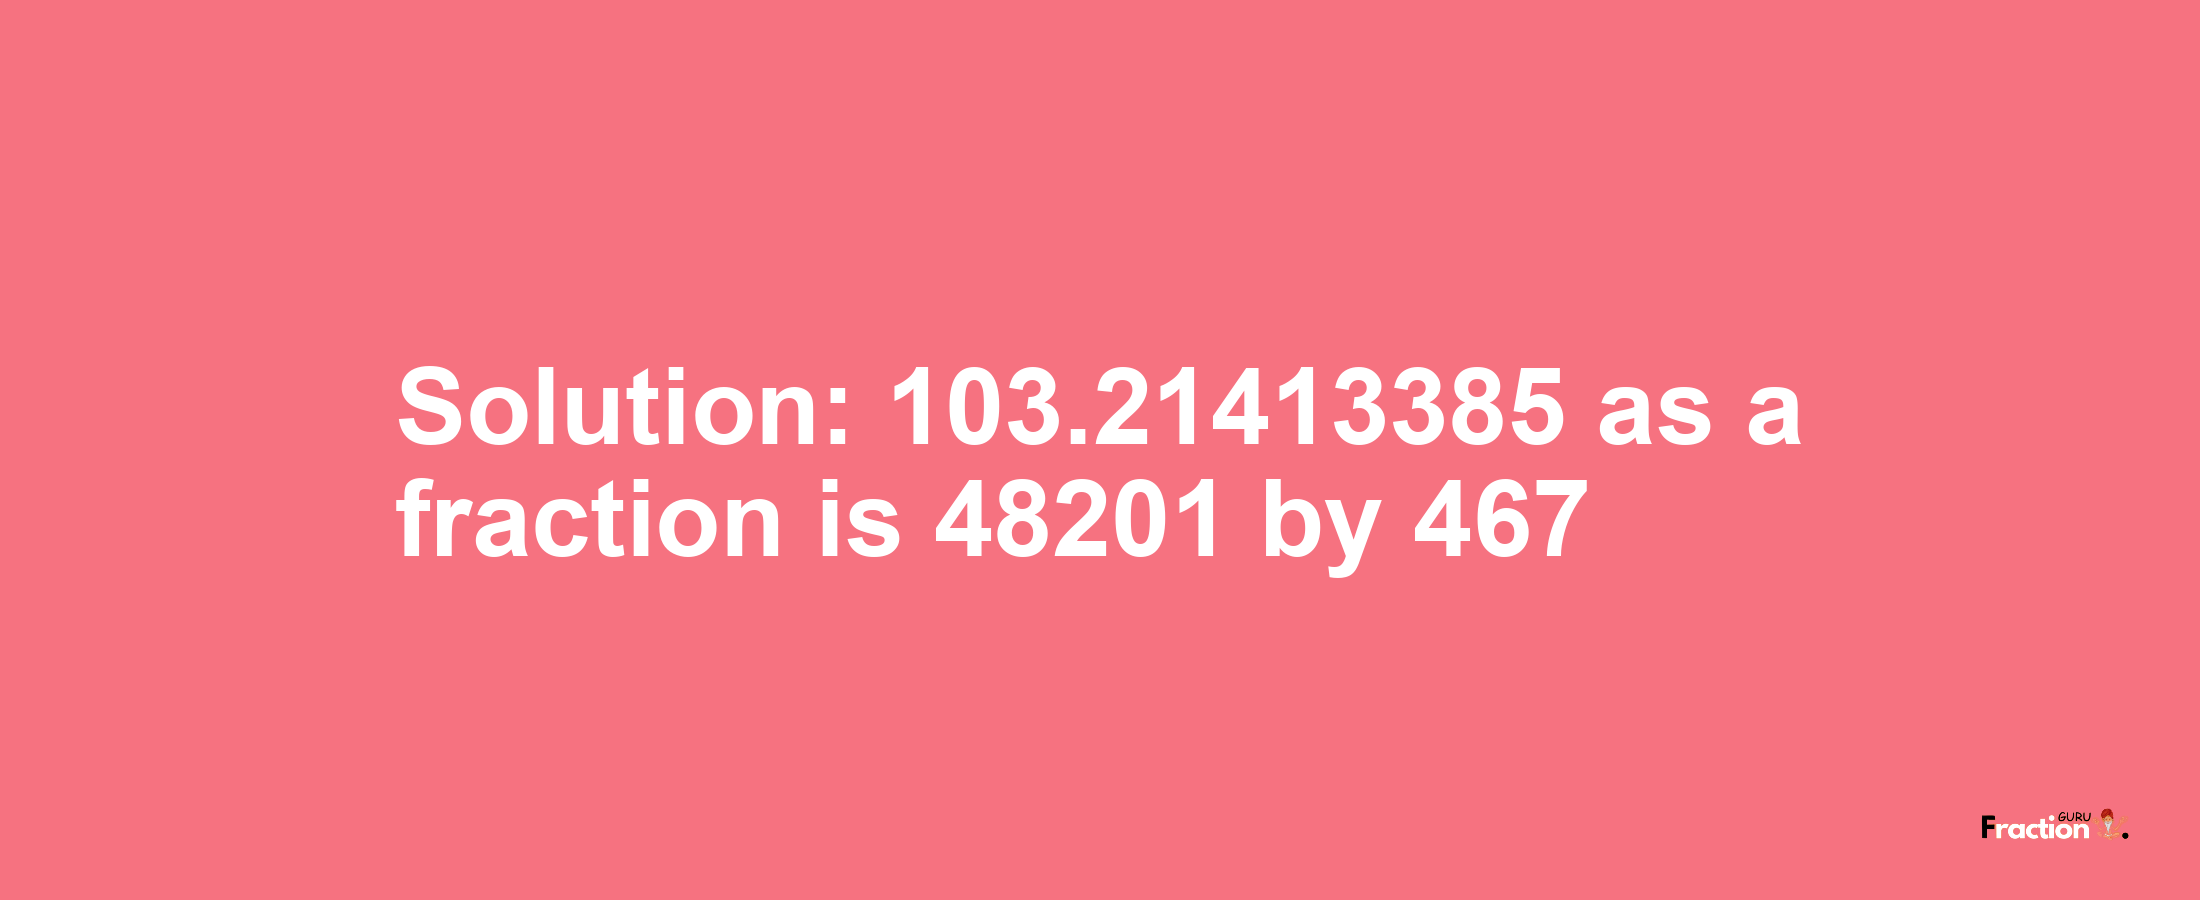 Solution:103.21413385 as a fraction is 48201/467